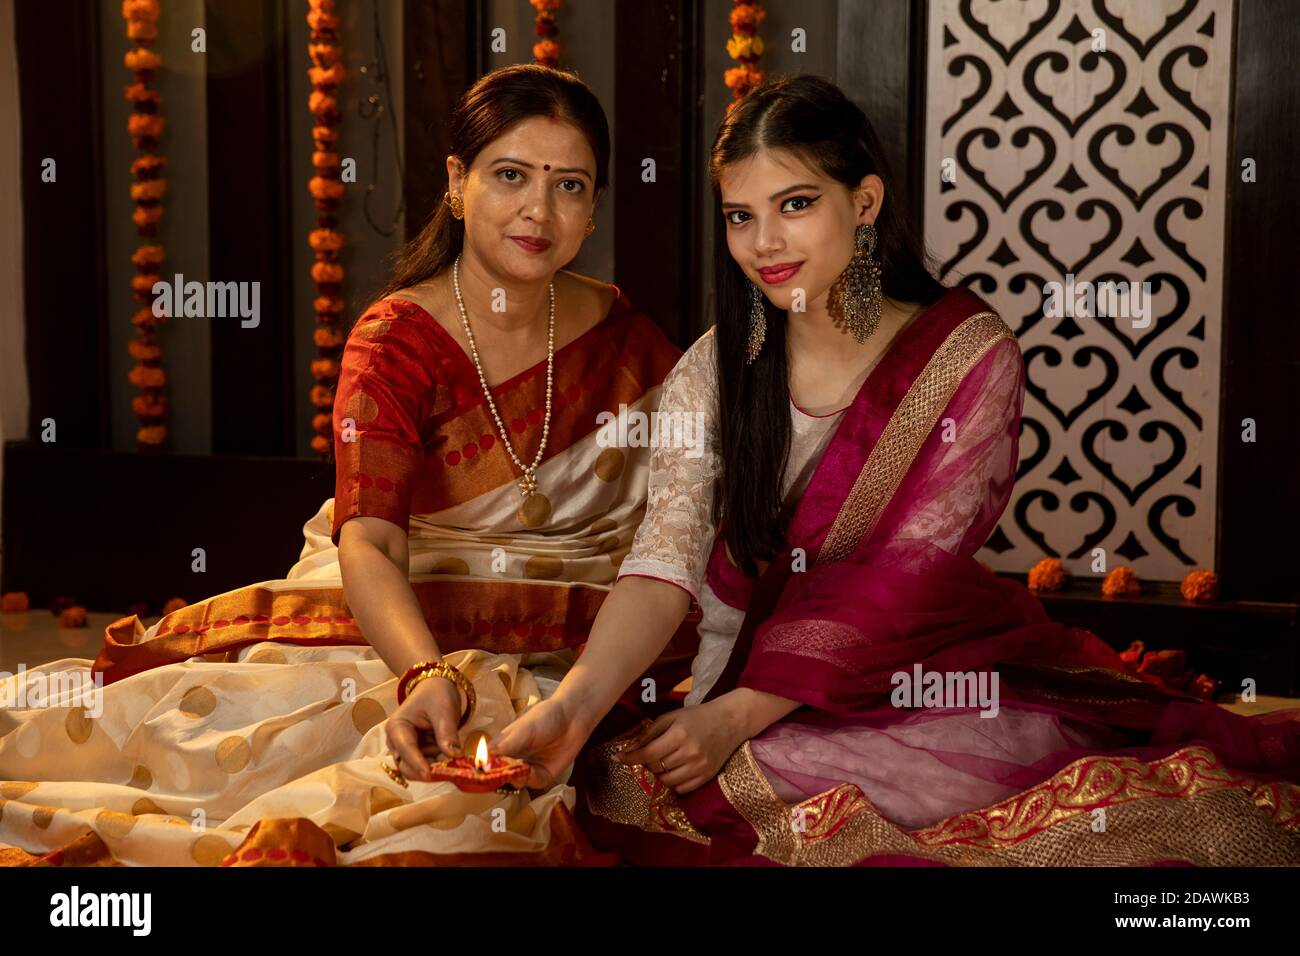 An Indian mother and daughter celebrating the Festival of Lights by lighting candles and diyas at home, Indian family celebrating Diwali. Stock Photo